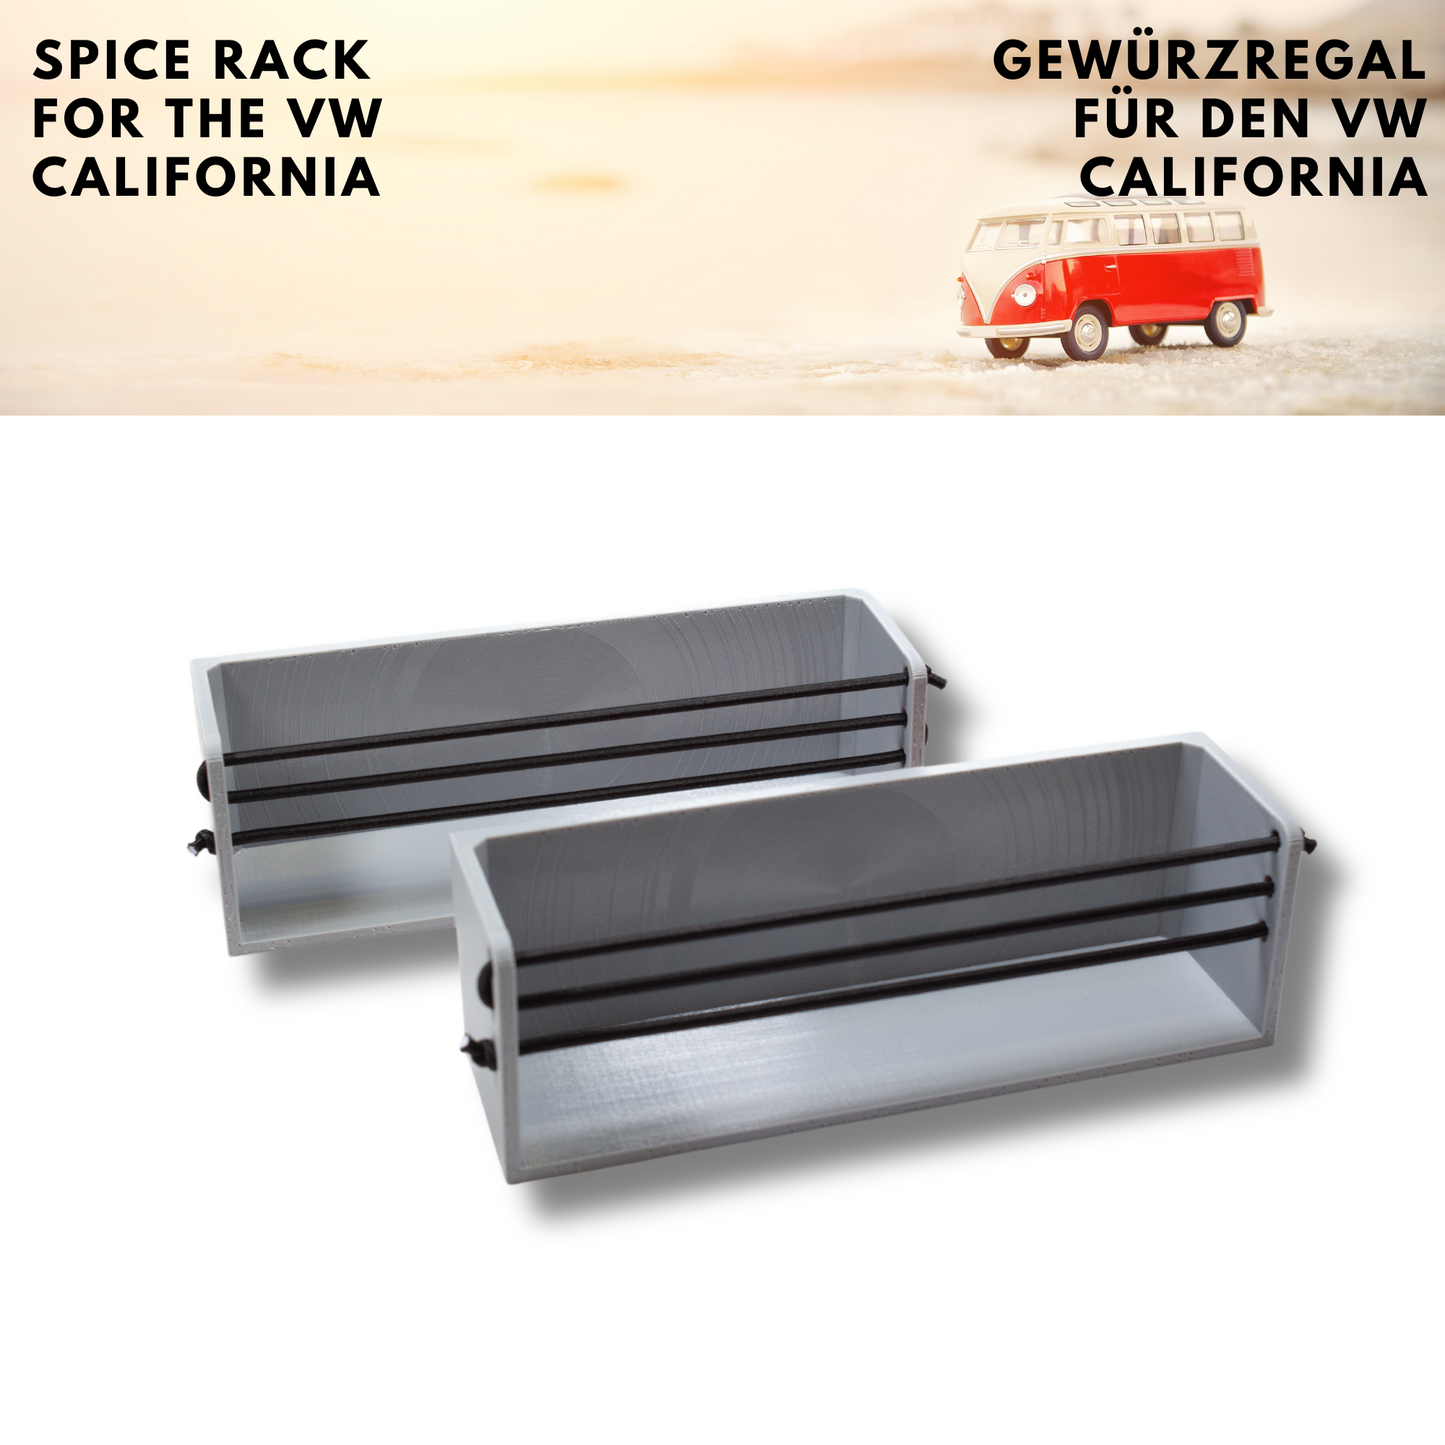 VW California T6.1 spice rack to stick on the existing shelf in the blackout of the small window